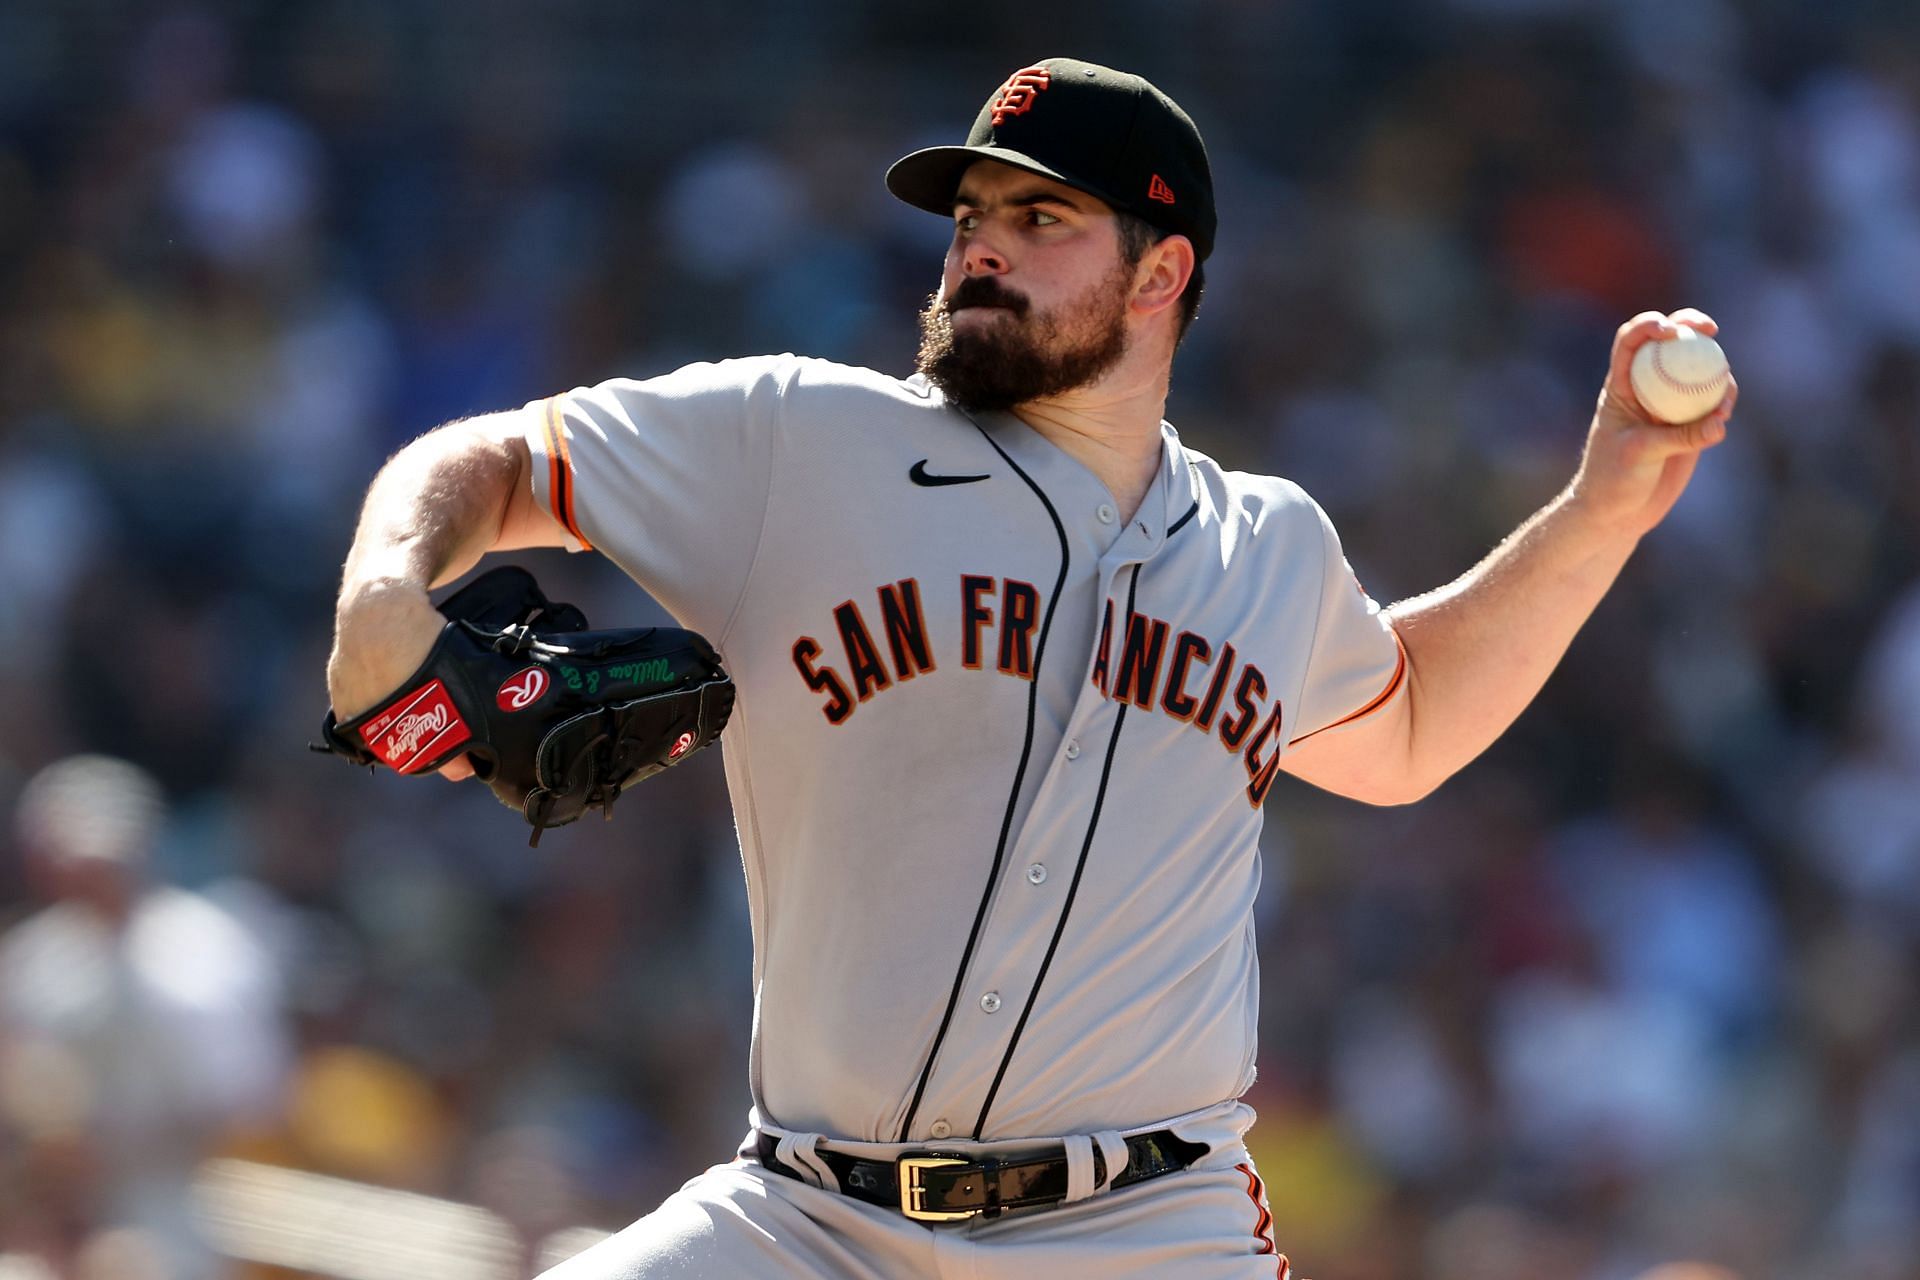 Carlos Rodon of the San Francisco Giants pitches against the San Diego Padres at PETCO Park